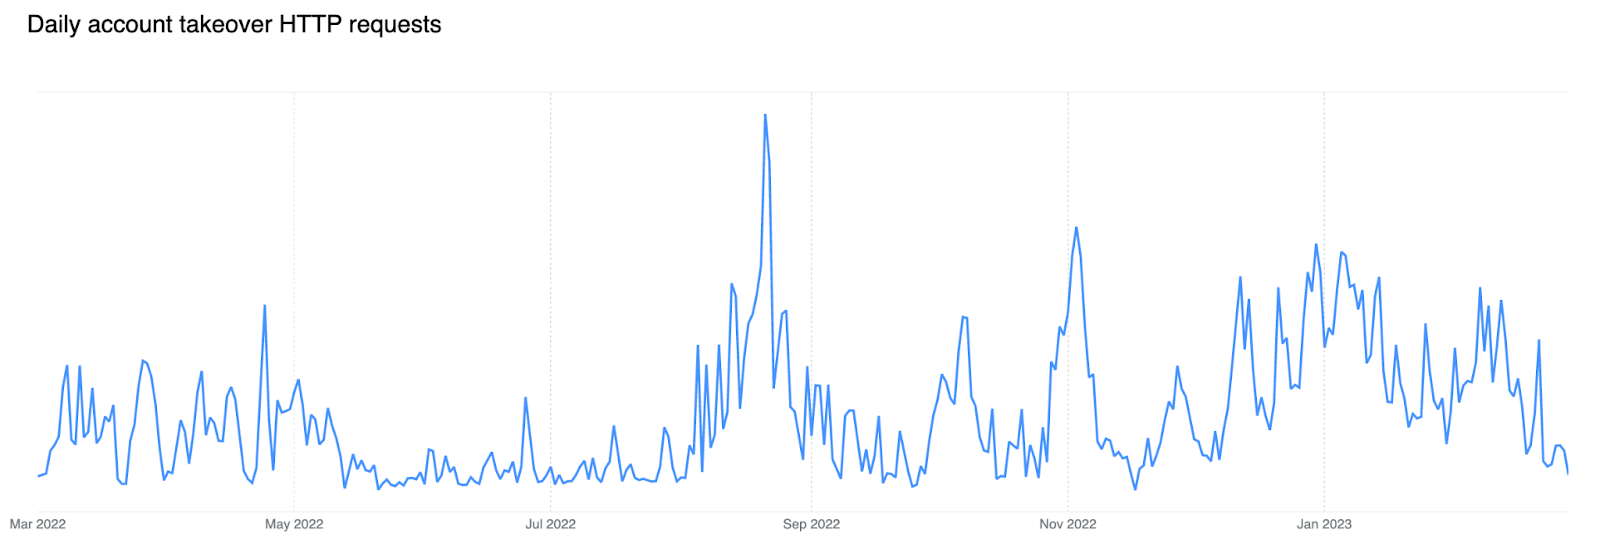 Daily account takeover HTTP requests over the last 12 months